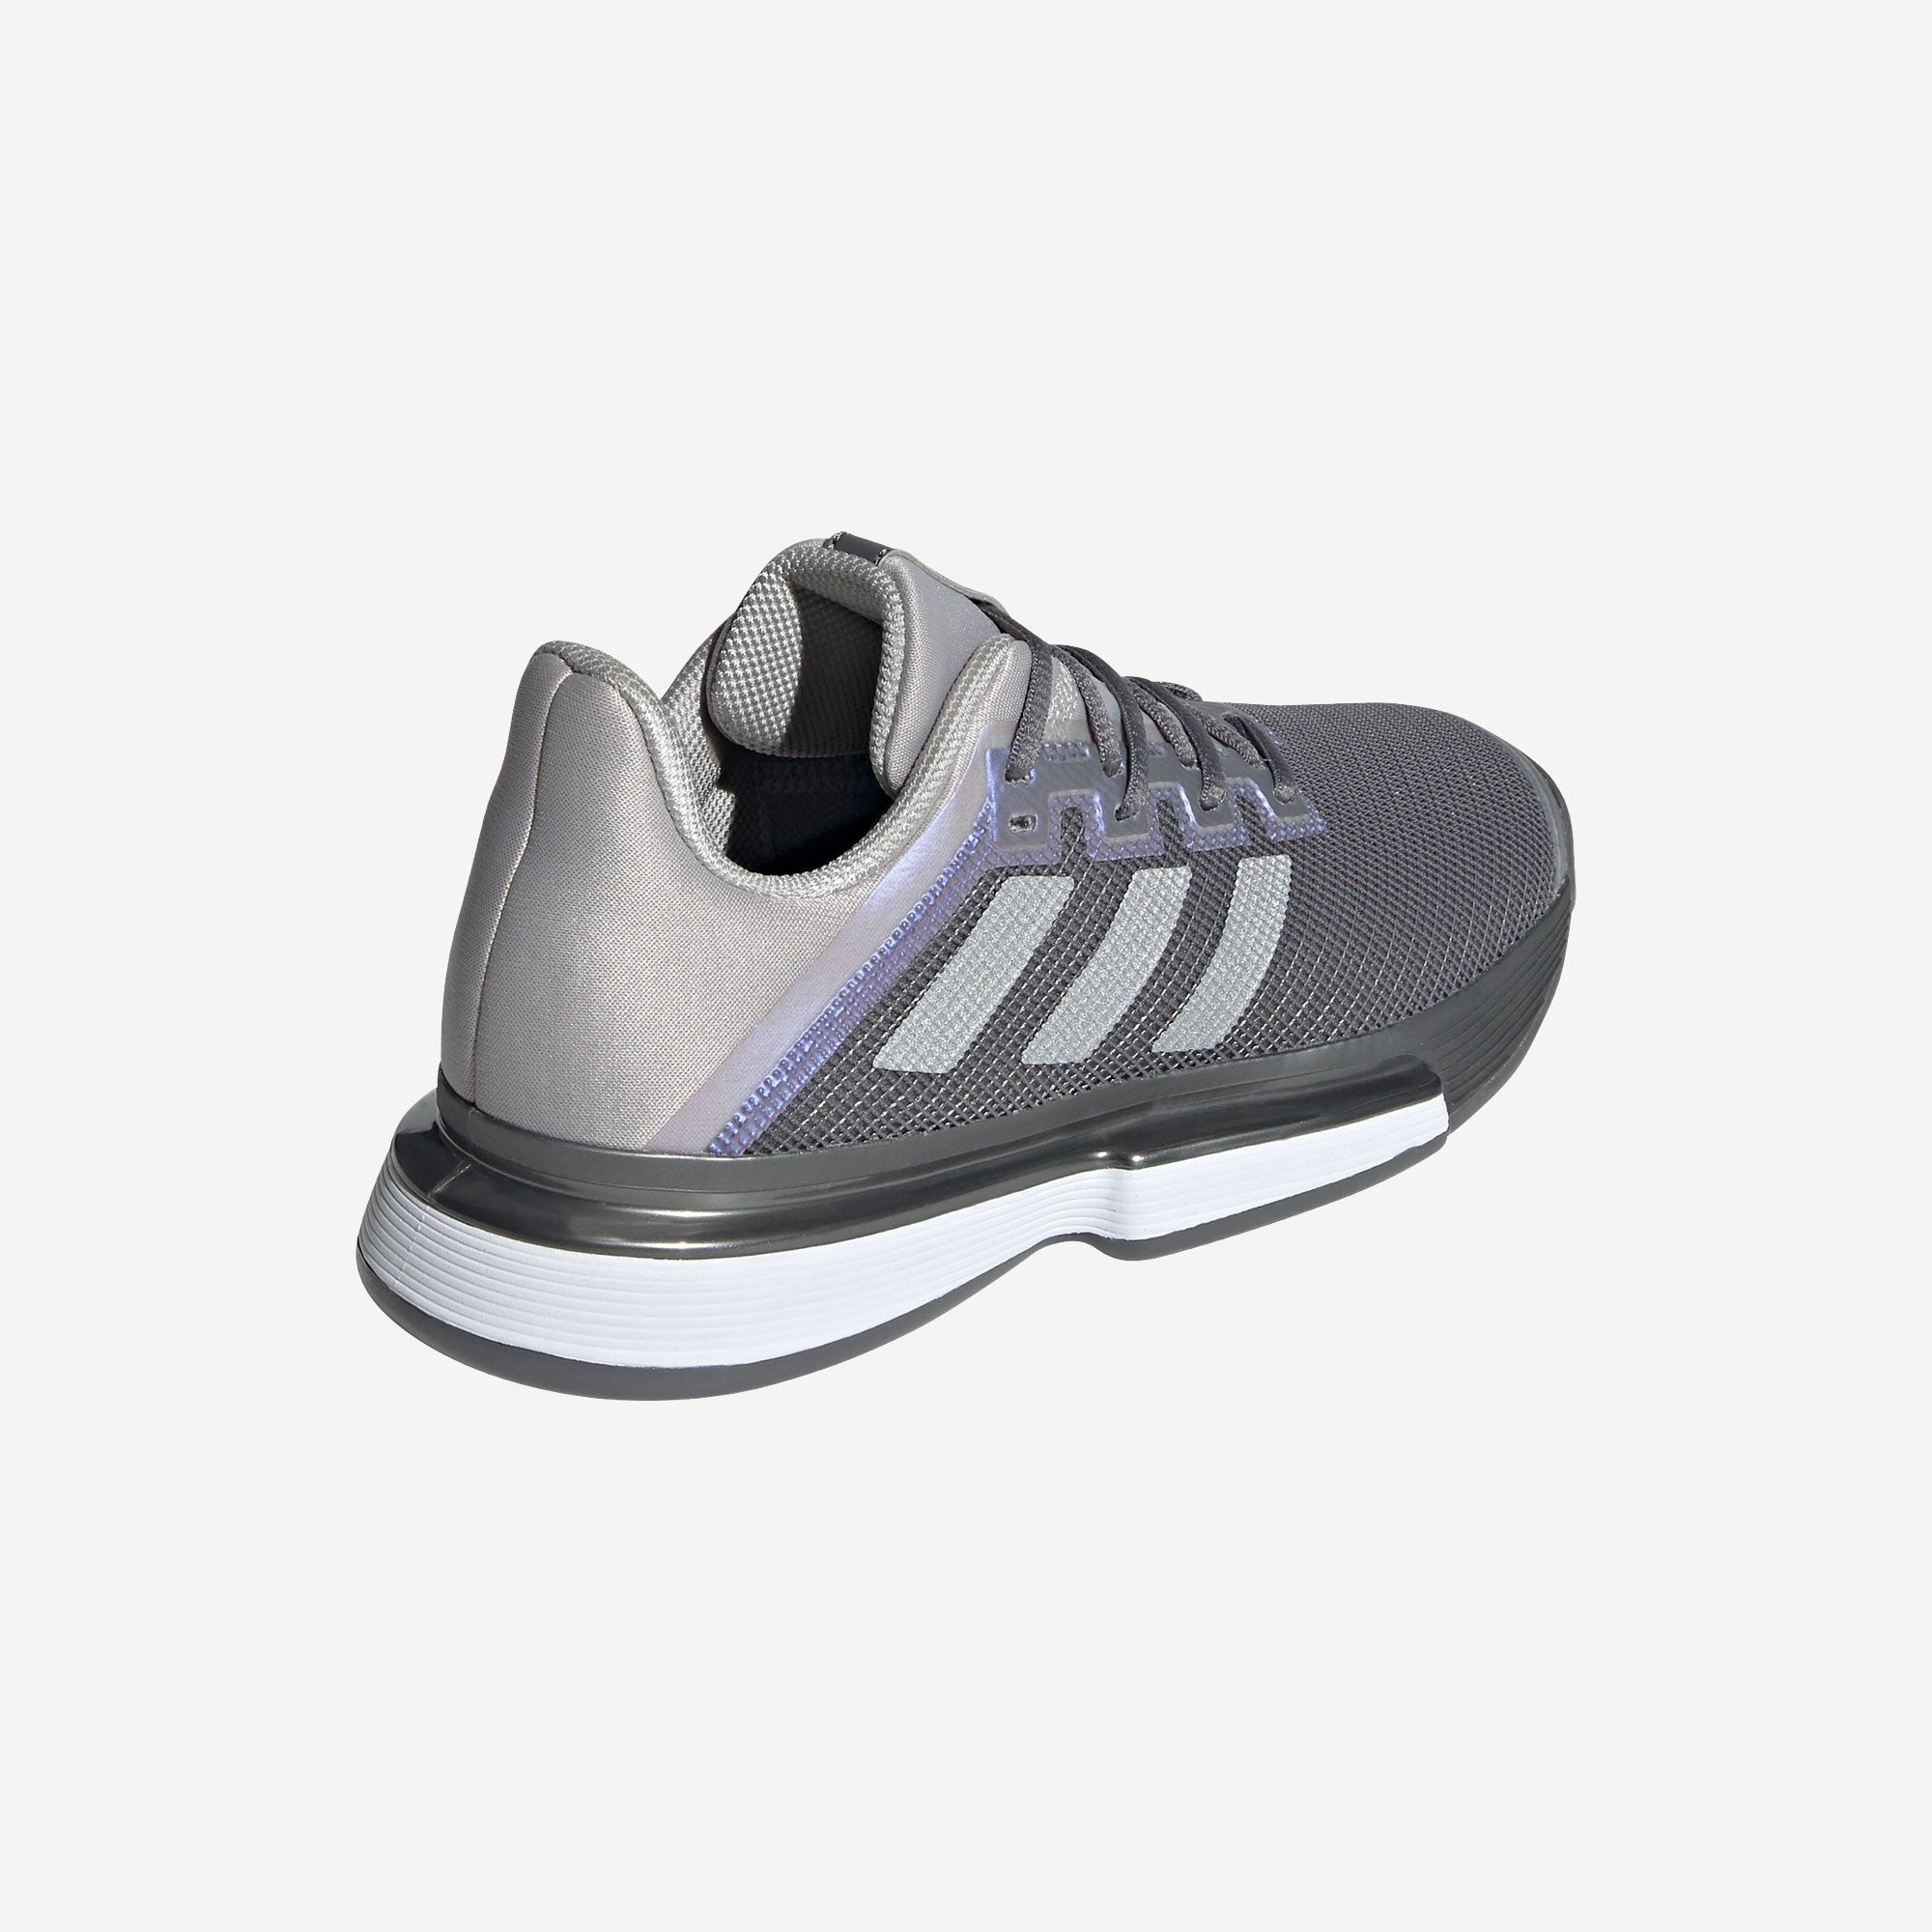 adidas SoleMatch Bounce Women's Clay Court Tennis Shoes Grey (5)